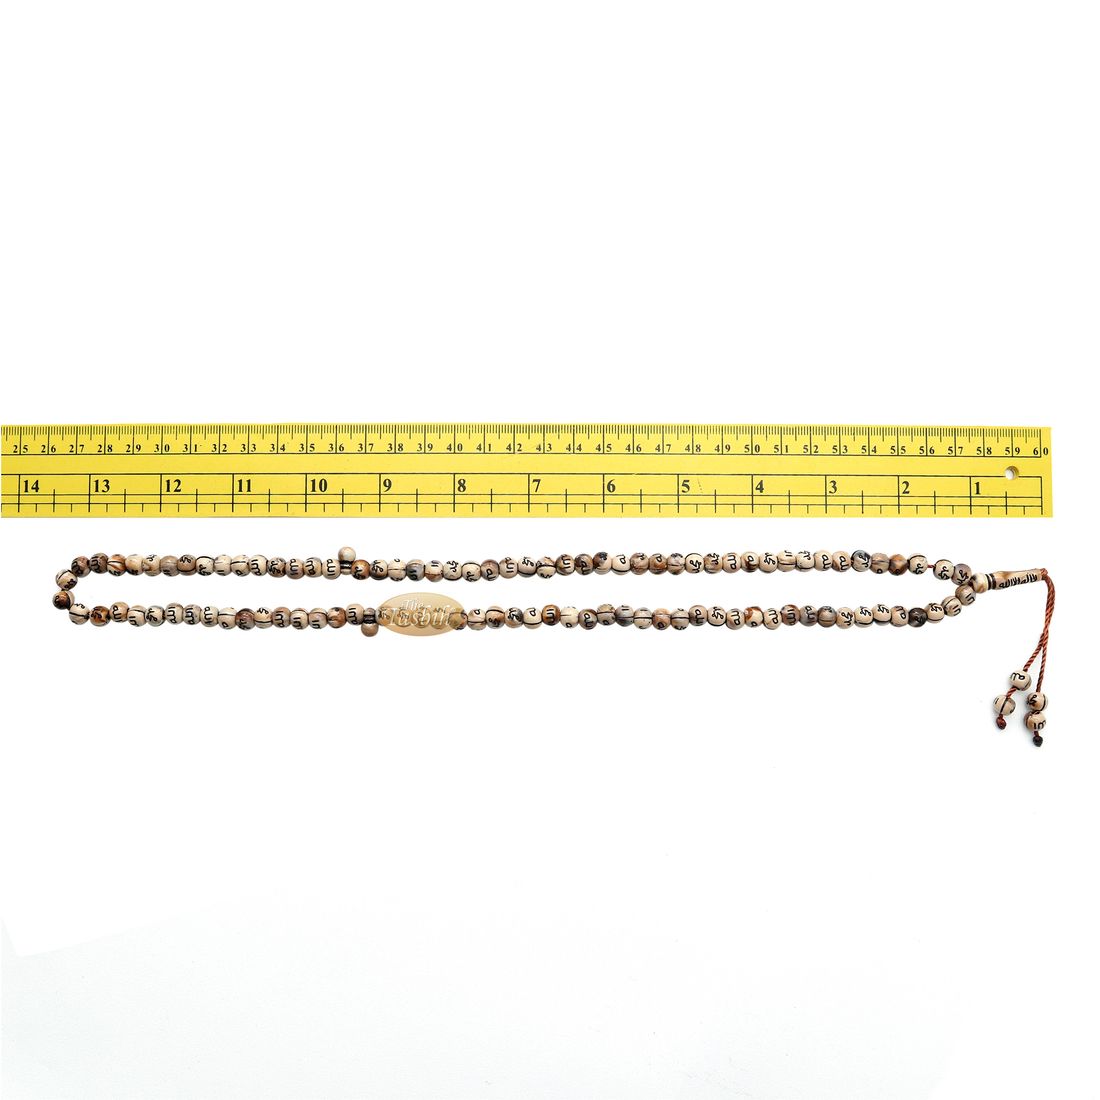 Marble Light Brown 7mm Plastic with Silver Allah Muhammad Prayer Beads